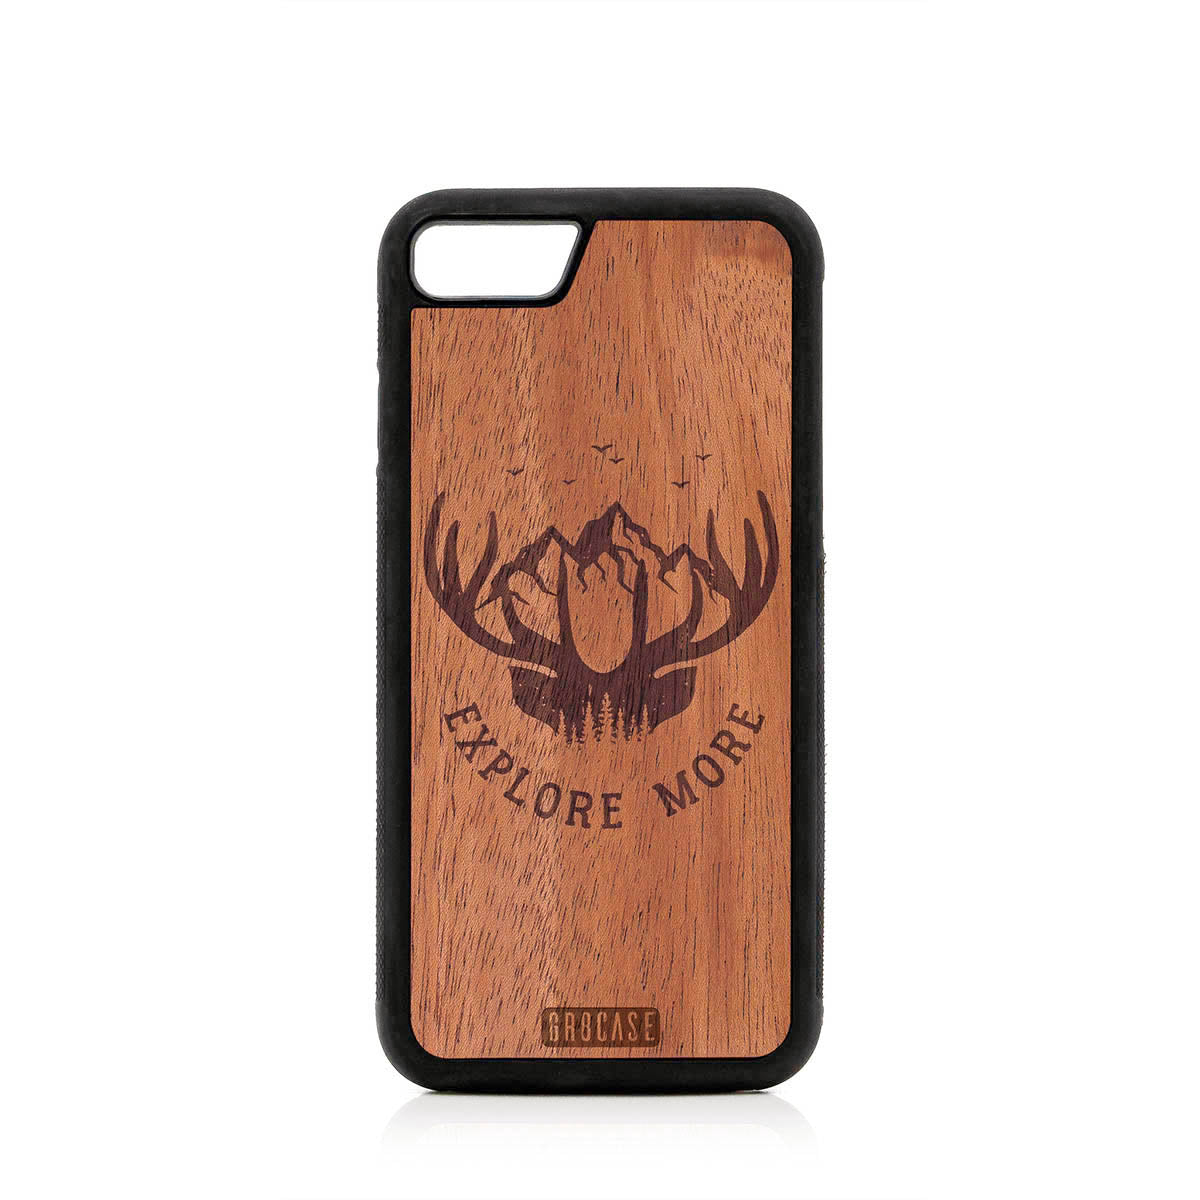 Explore More (Forest, Mountains & Antlers) Design Wood Case For iPhone 7/8 by GR8CASE